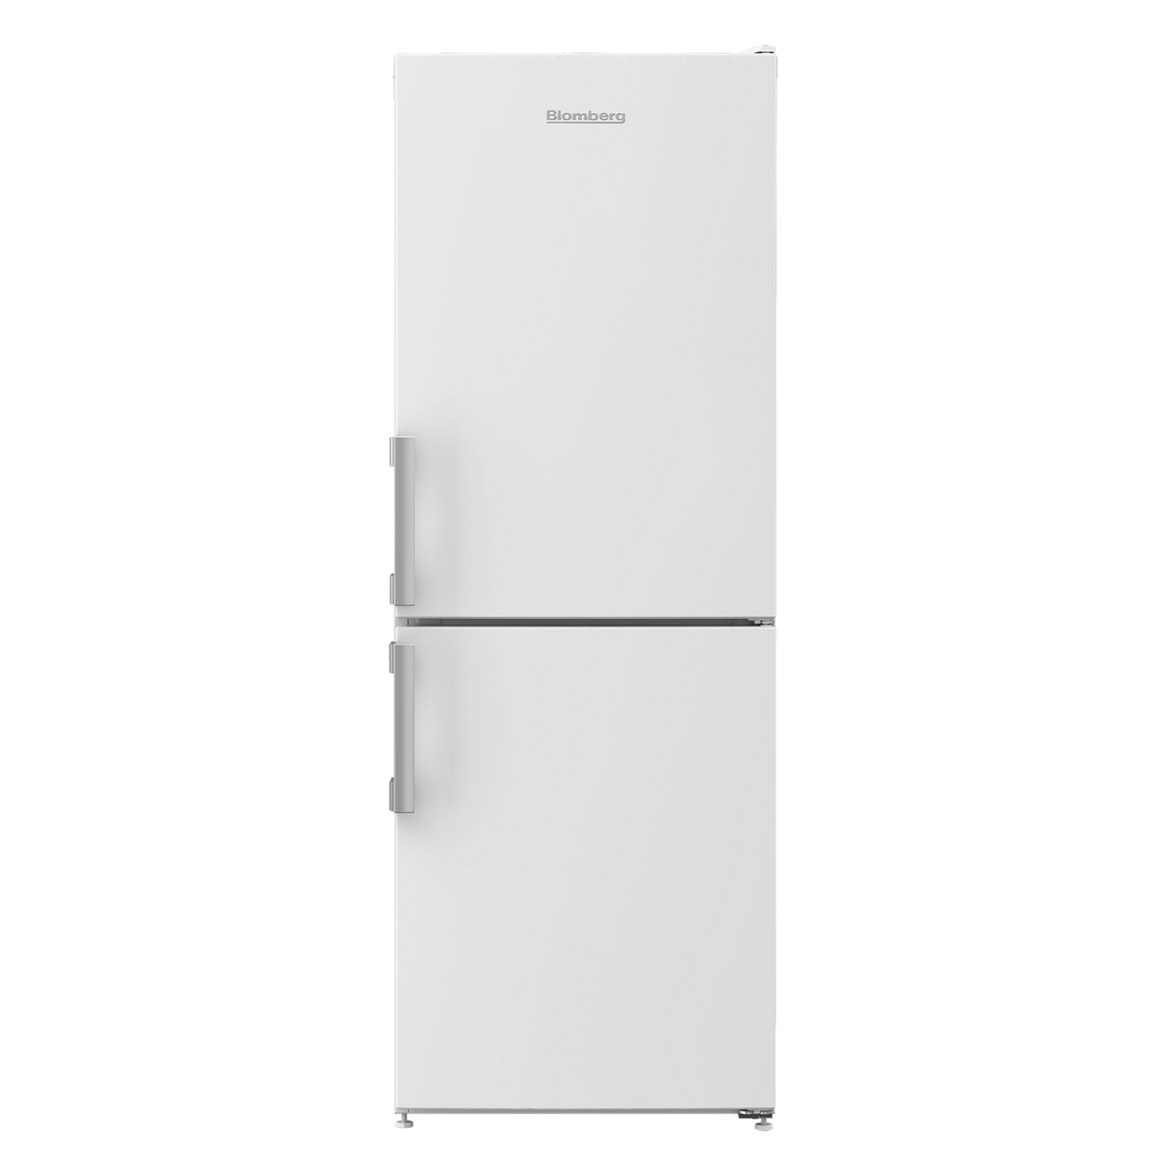 Image of Blomberg KGM4513 54cm Frost Free Fridge Freezer in White 1 52m F Rated